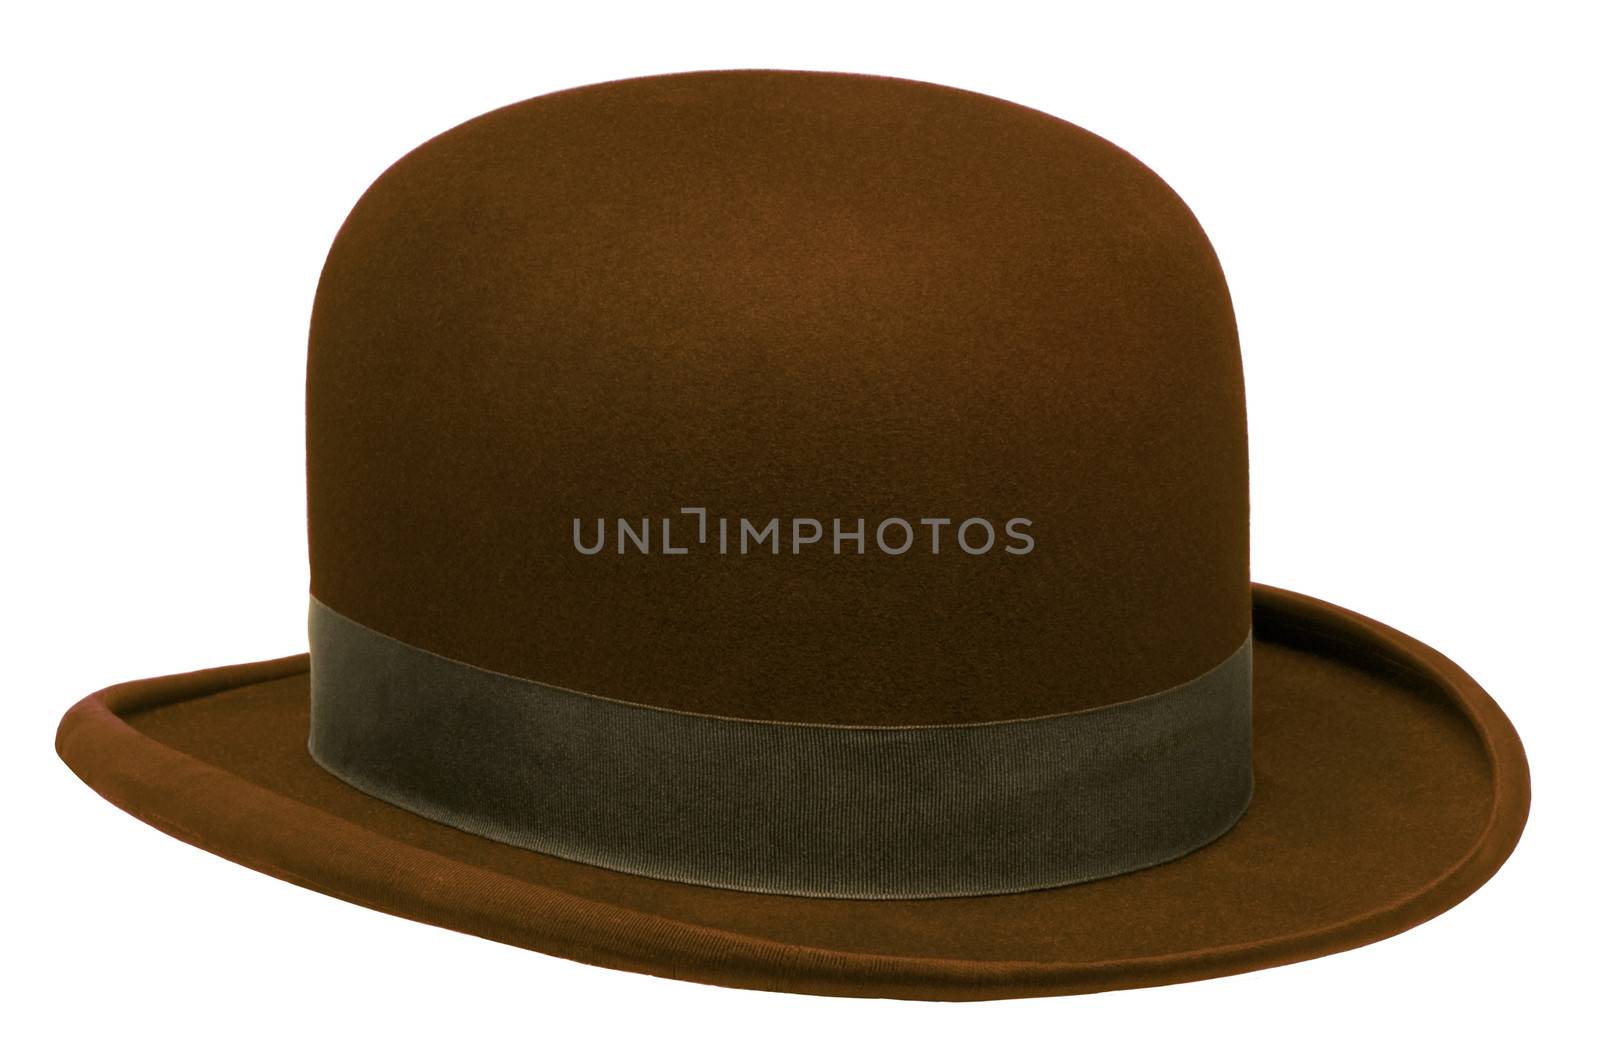 Brown bowler or derby hat by Balefire9